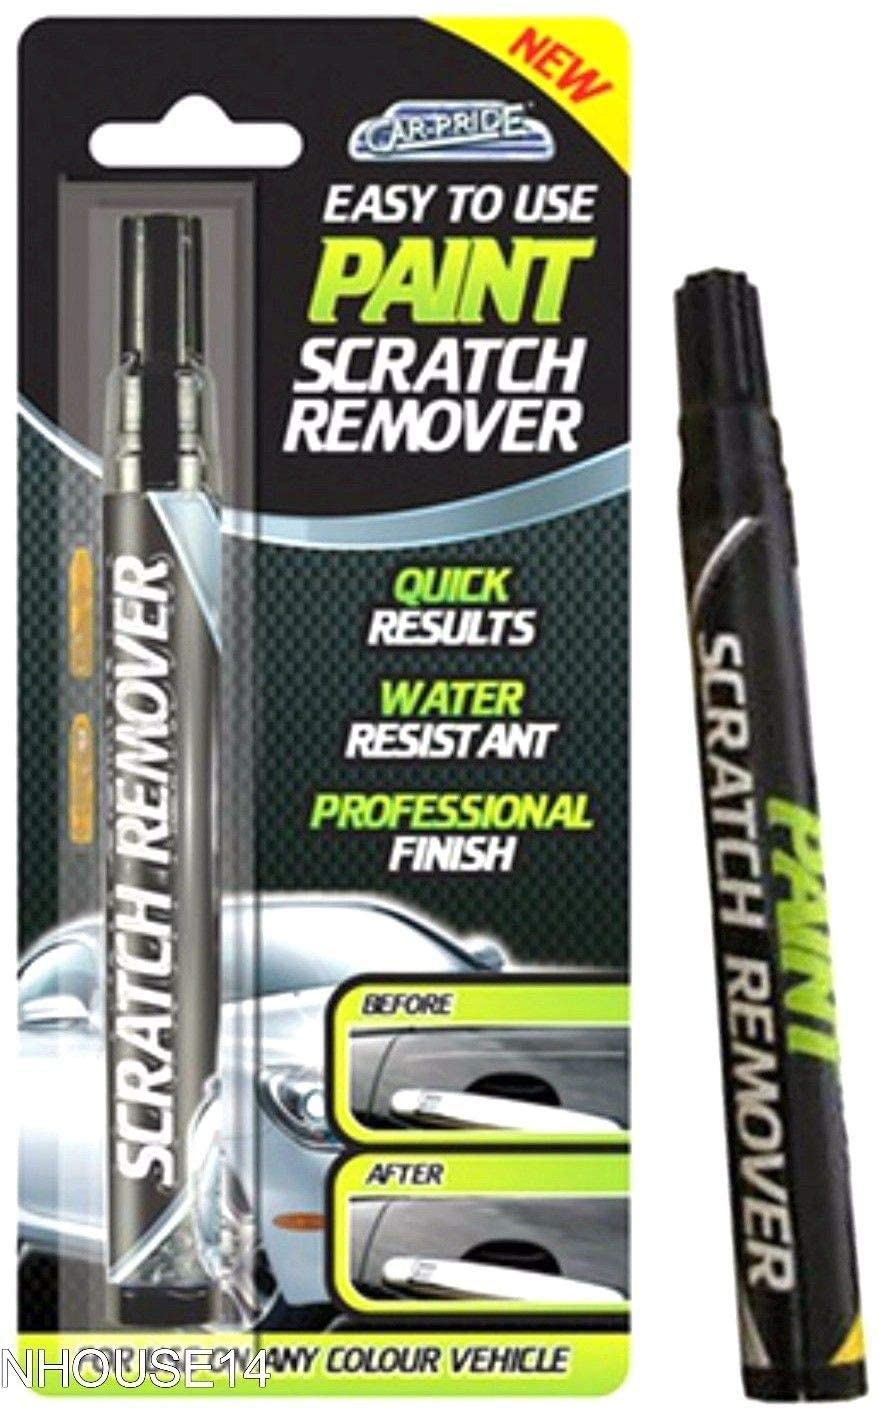 Car Care Magic Scratch Remover 100ml, Shop Today. Get it Tomorrow!